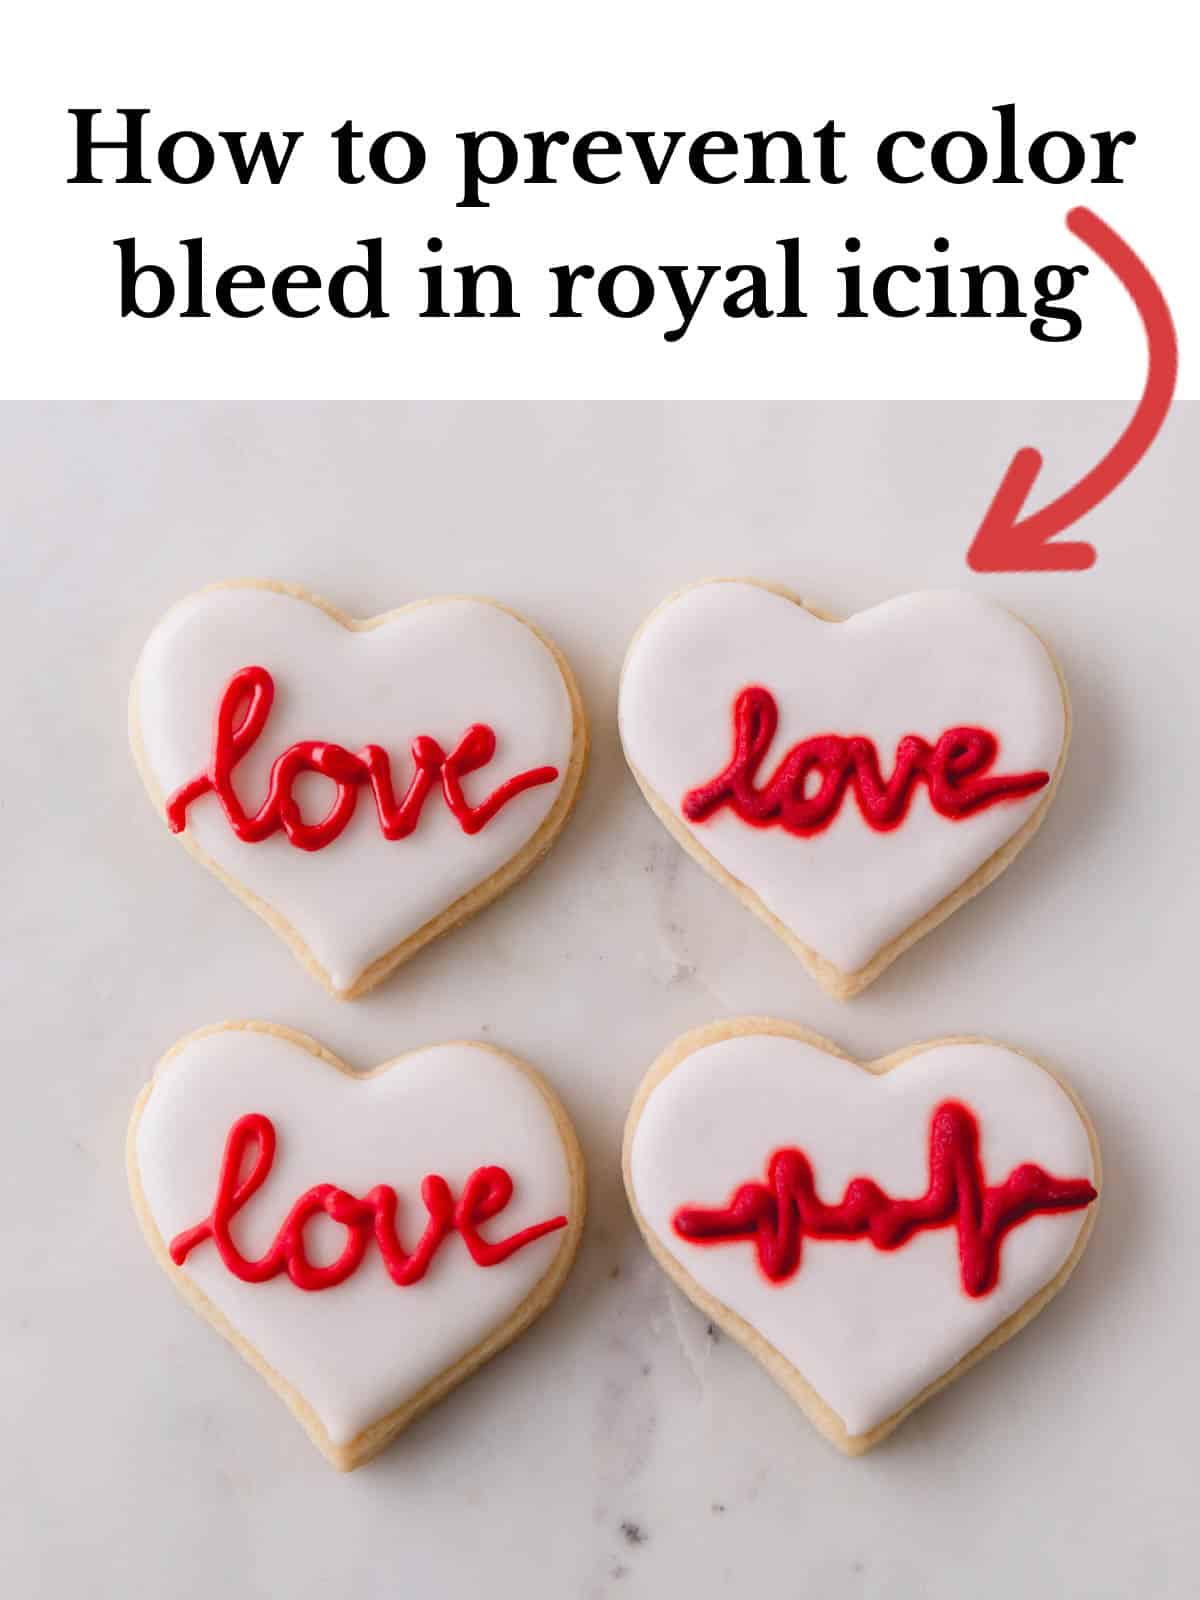 A picture reading, "how to prevent color bleed in royal icing" showing iced cookies.